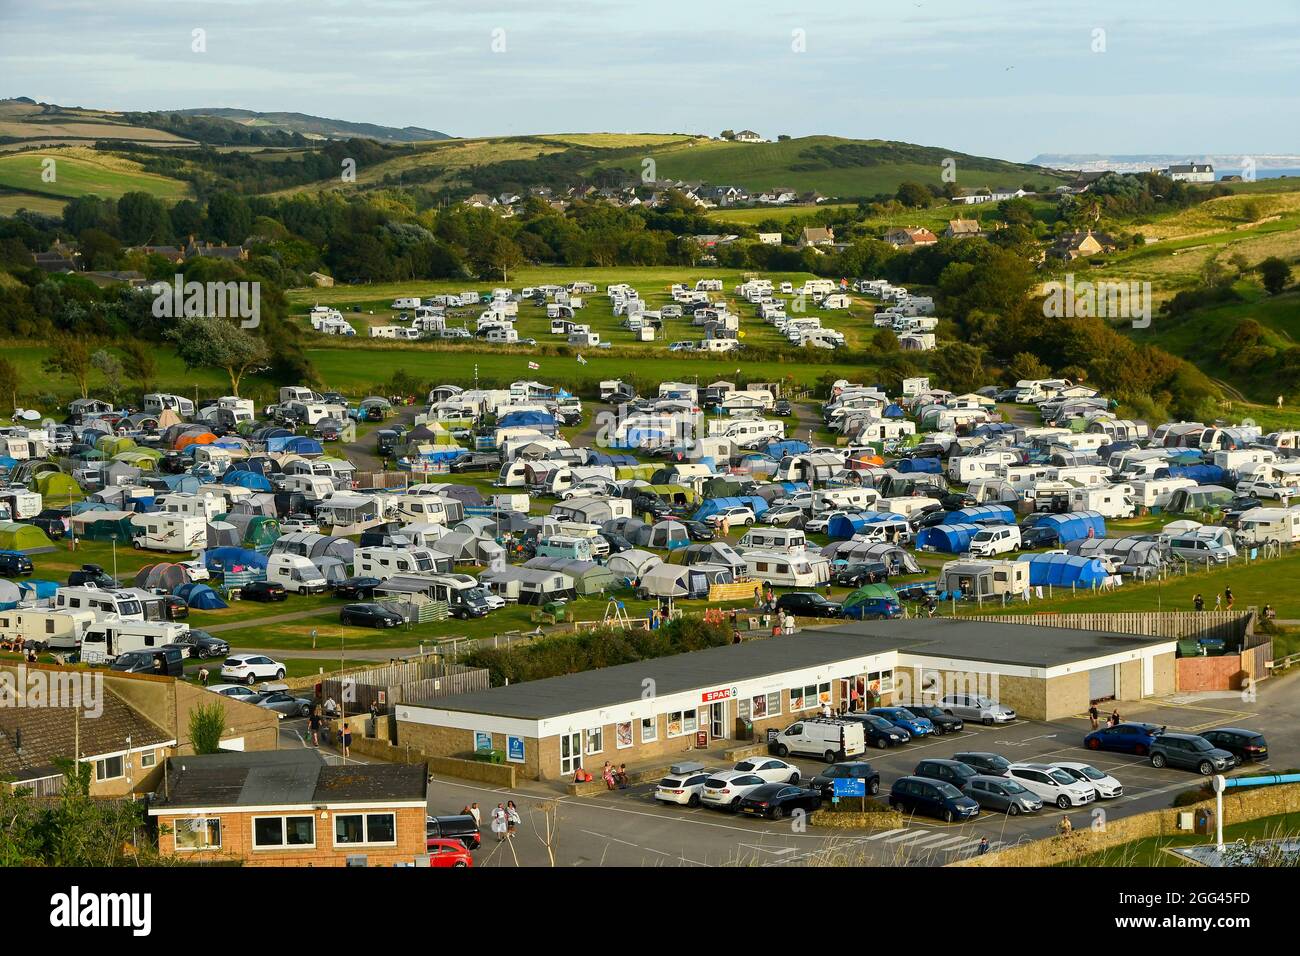 Burton Bradstock, Dorset, UK. 28th August 2021. UK Weather. The camping  field at Freshwater Beach Holiday Park at Burton Bradstock in Dorset is  packed with holidaymakers caravans, tents and camper vans on